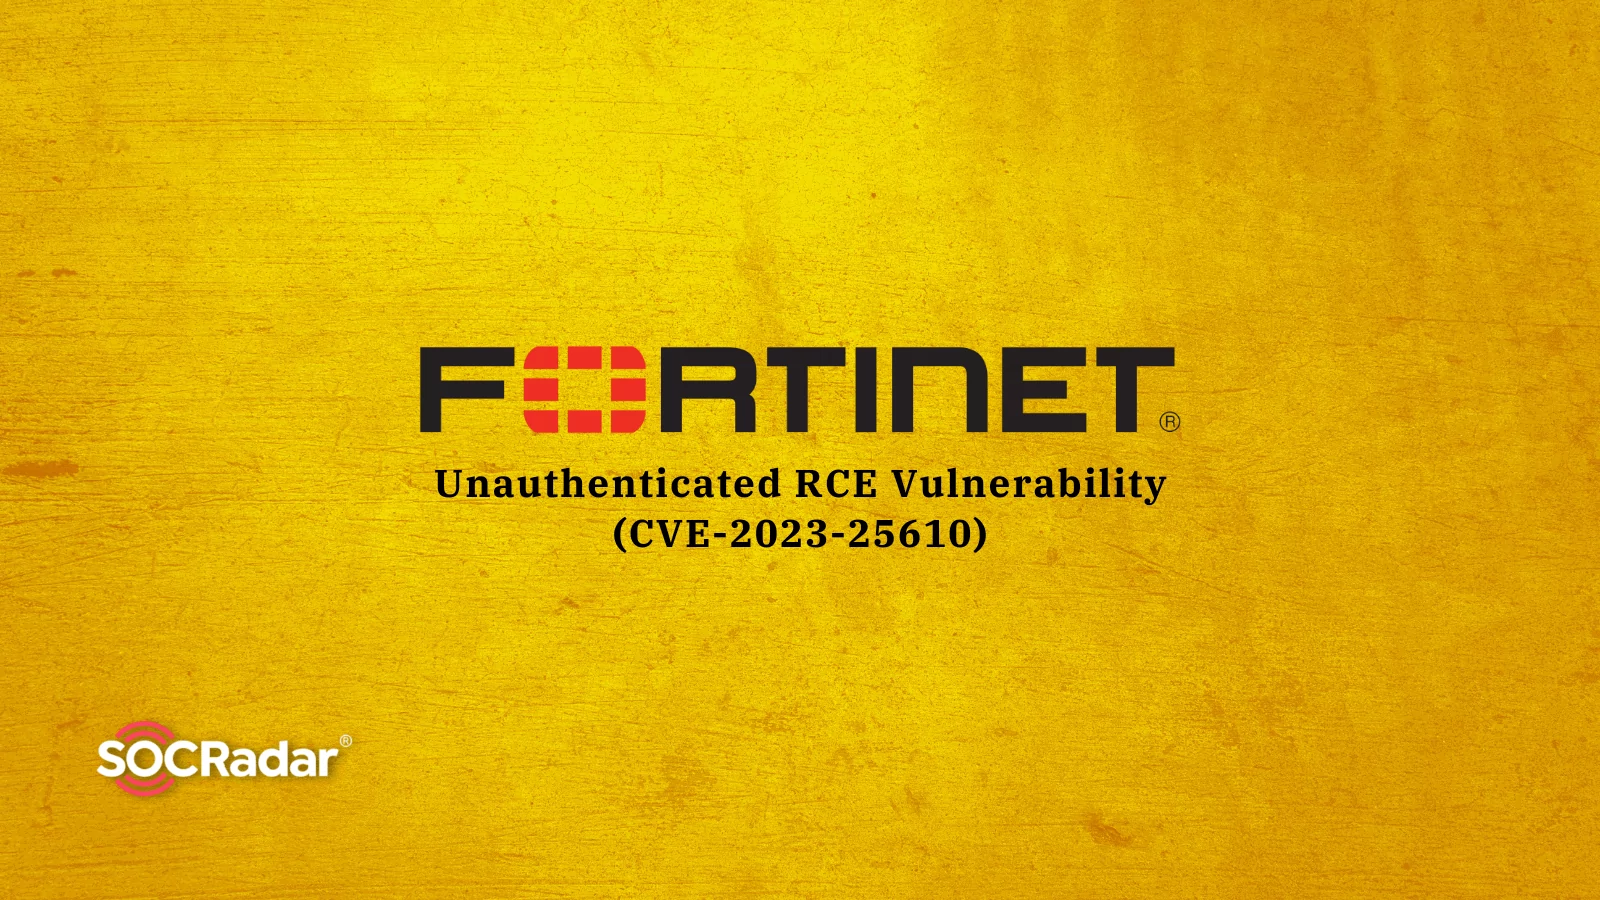 SOCRadar® Cyber Intelligence Inc. | Critical Unauthenticated RCE Vulnerability in Fortinet Products: CVE-2023-25610